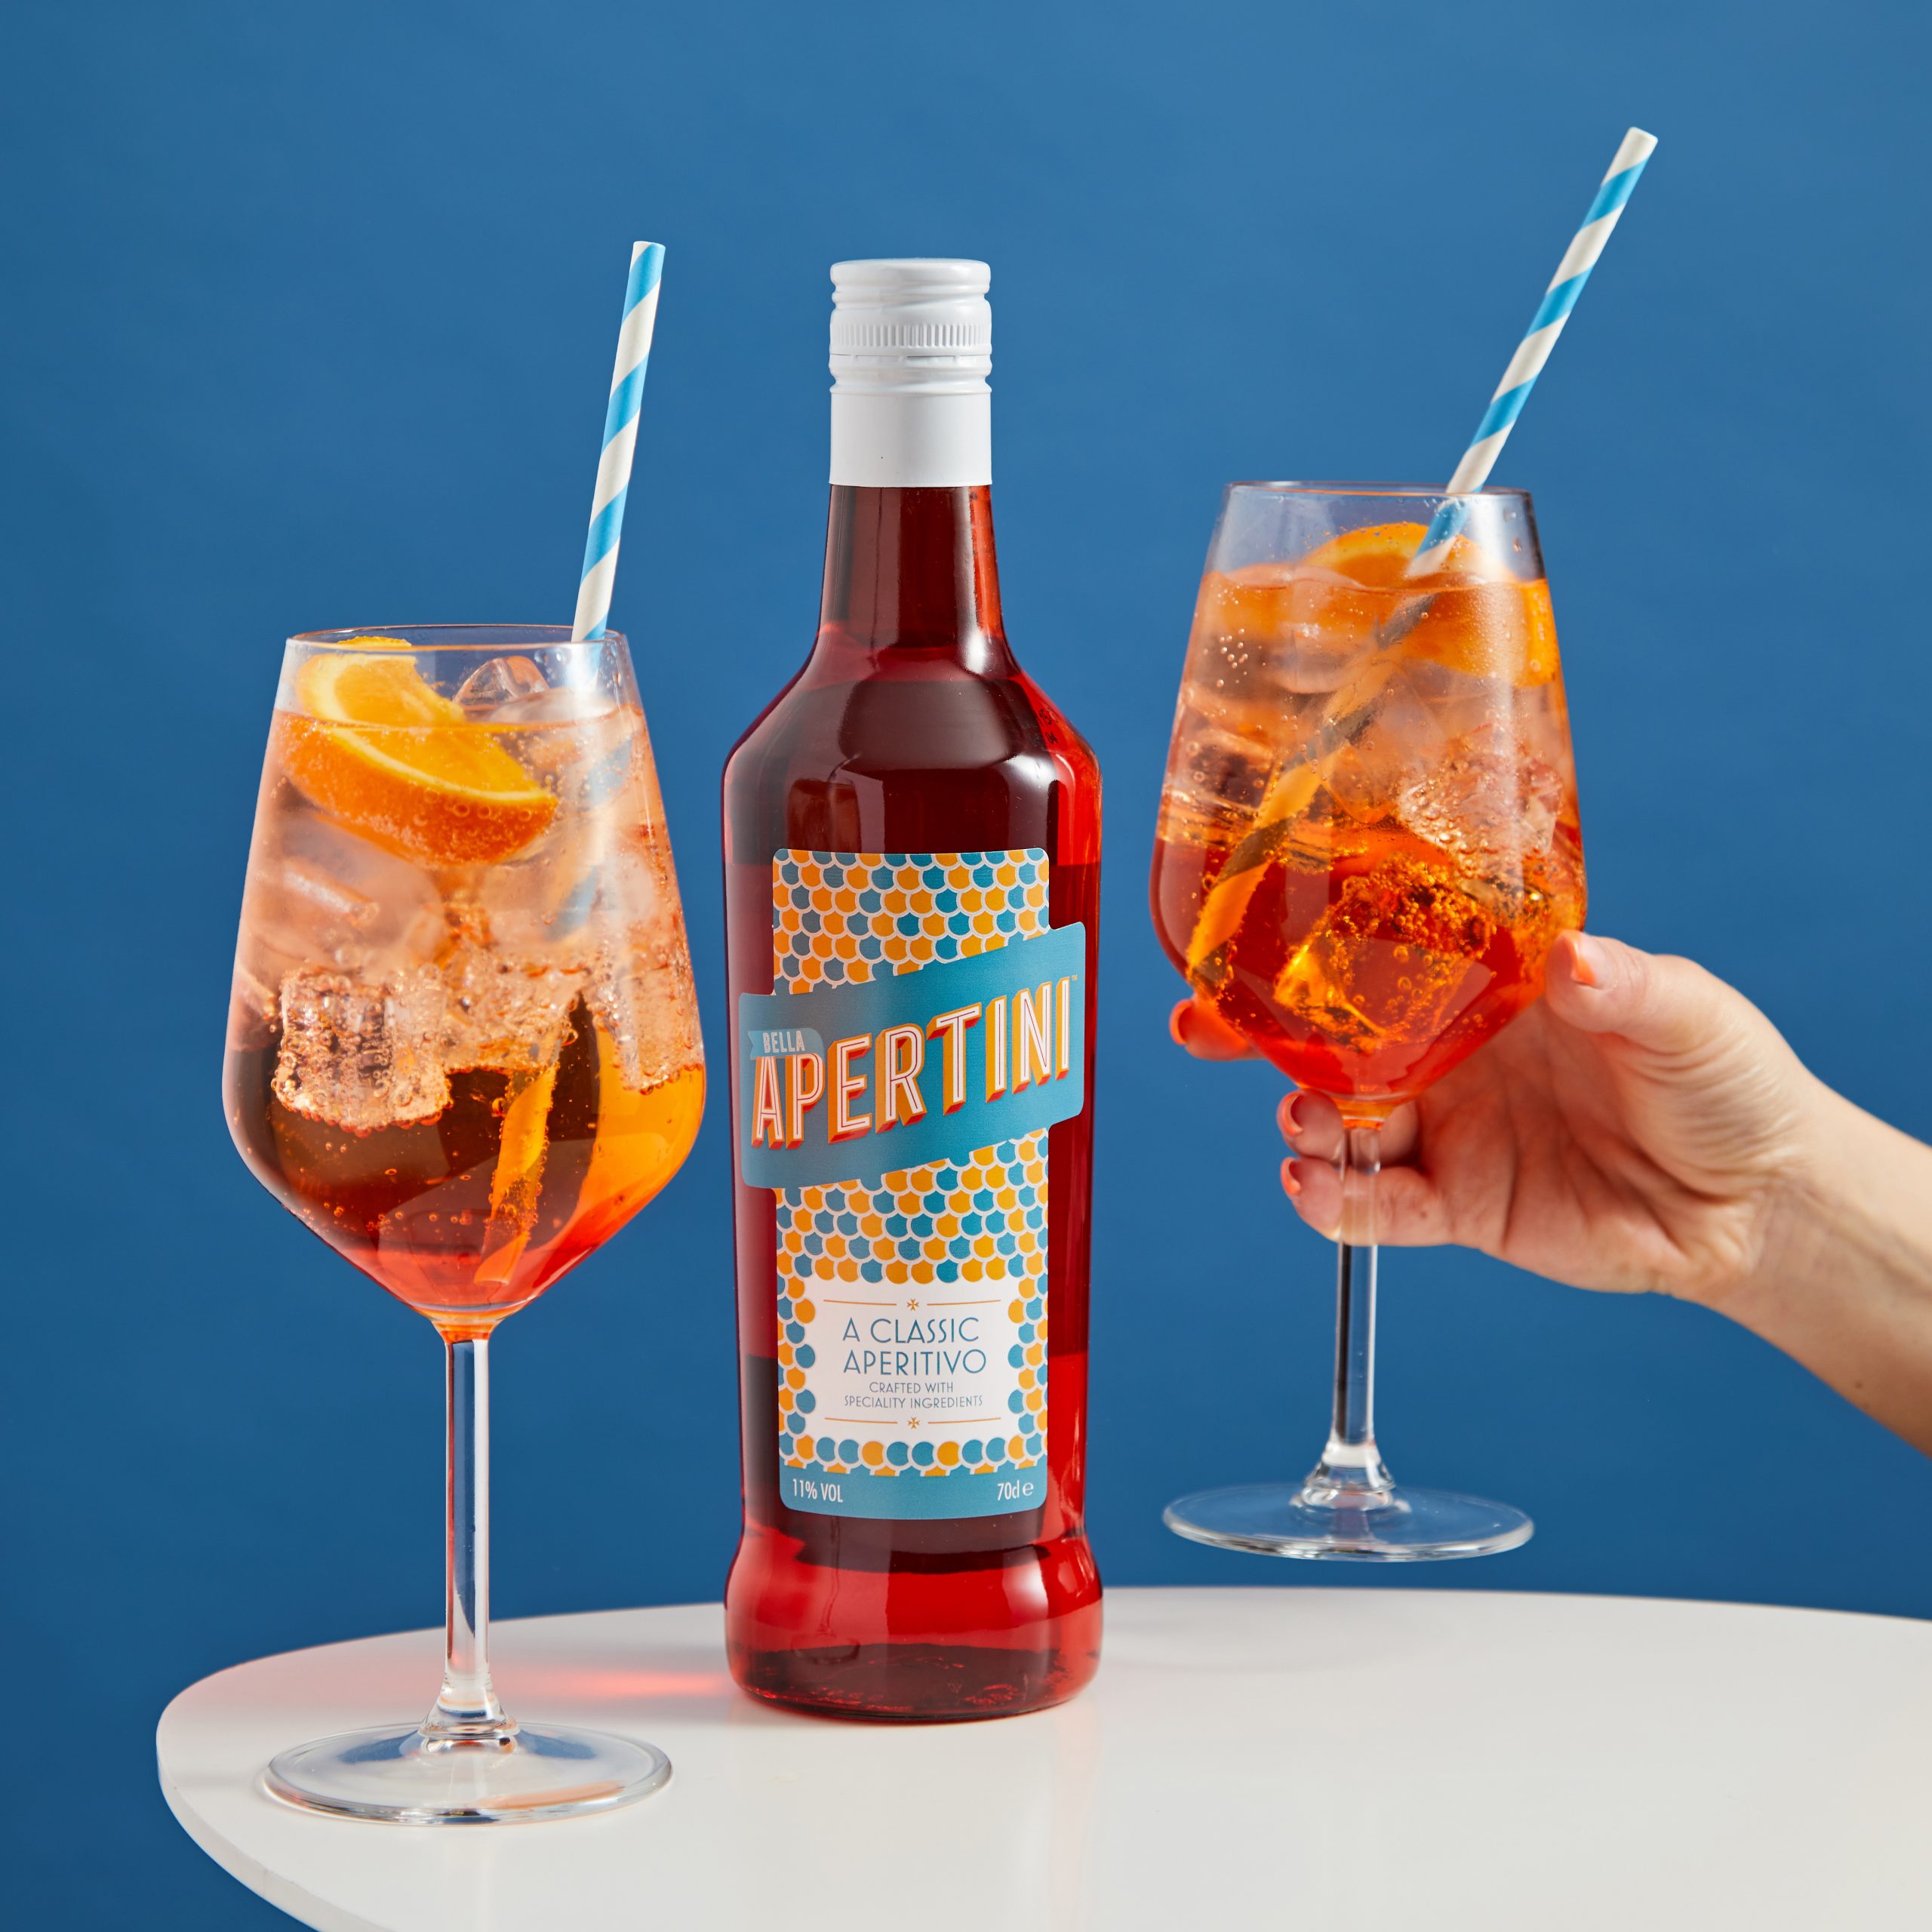 Aperitivo brand Bella Apertini secures extended distribution